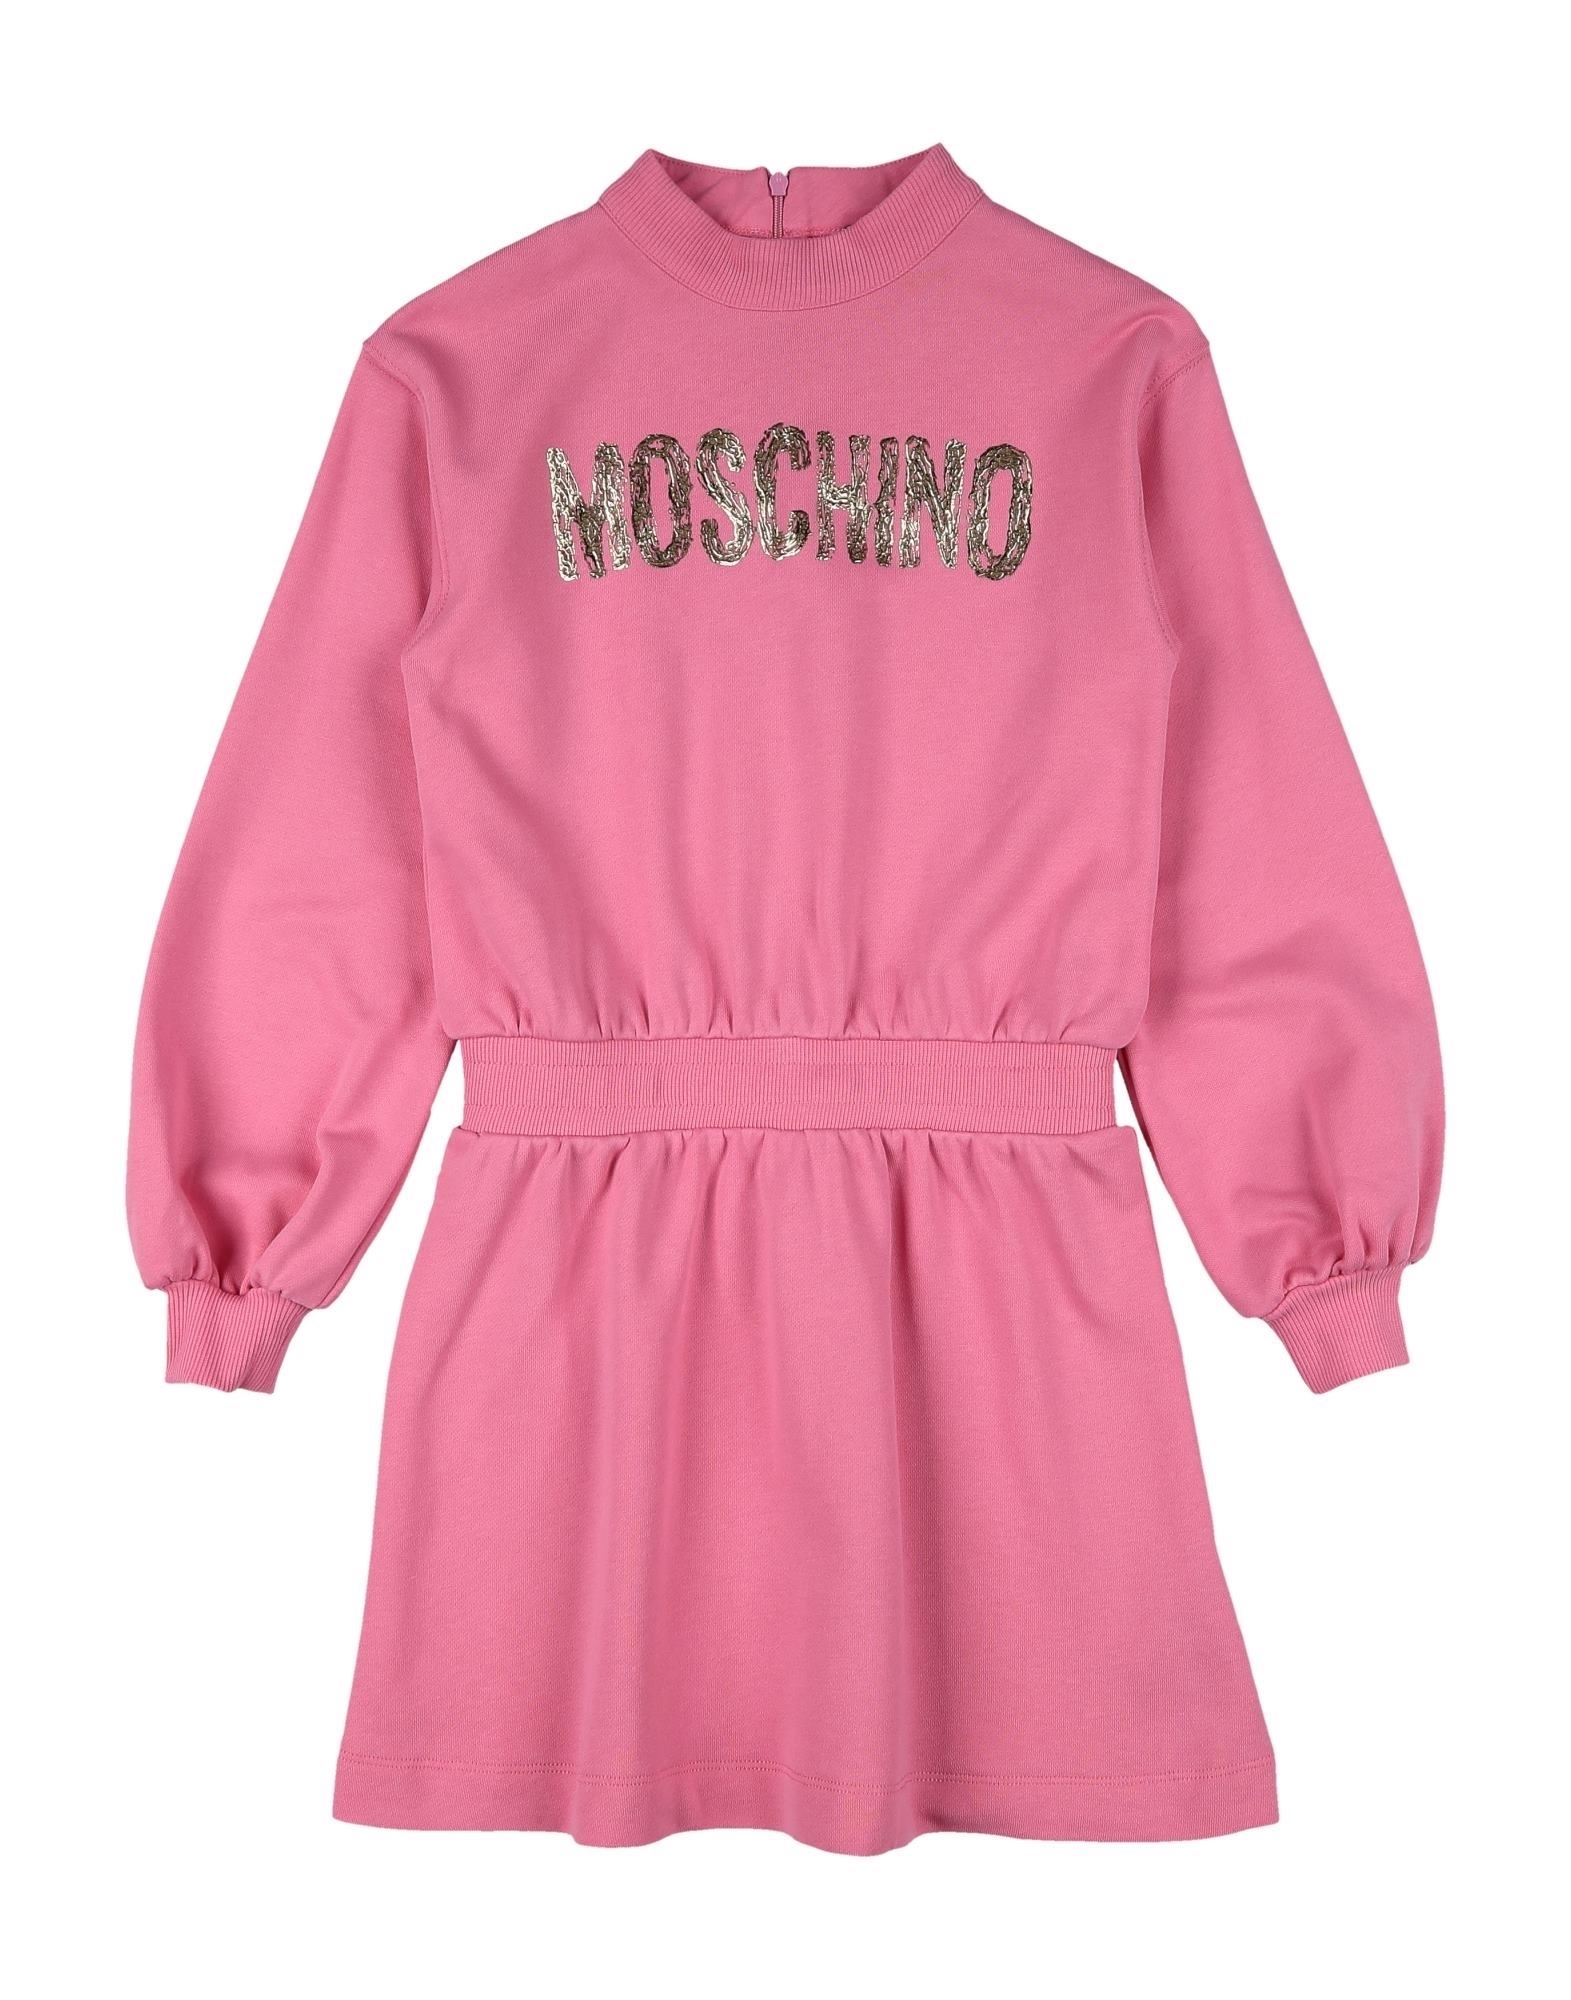 ＜YOOX＞ ★34%OFF！MOSCHINO TEEN ガールズ 9-16 歳 キッズワンピース ピンク 10 コットン 100%